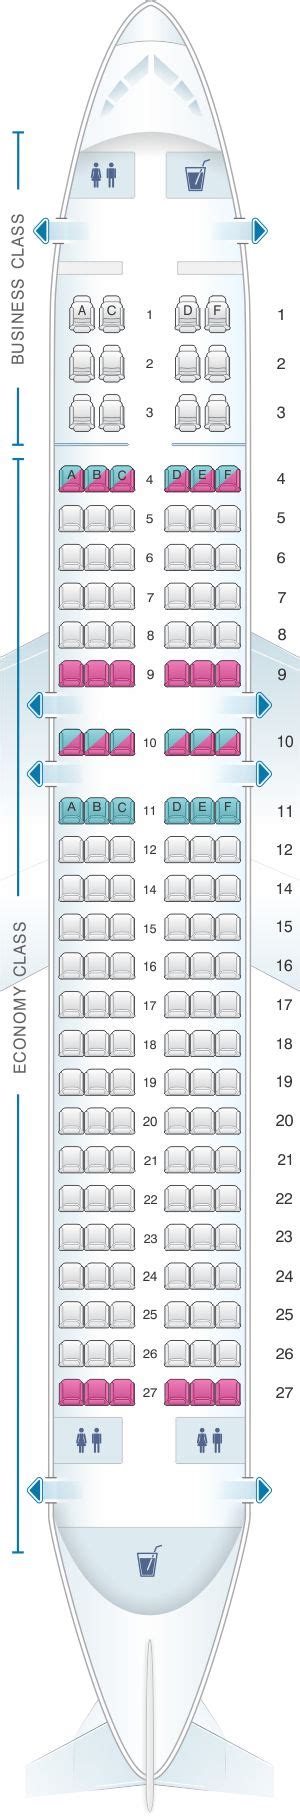 An Airplanes Seating Chart With The Seats Labeled In Blue And Pink On